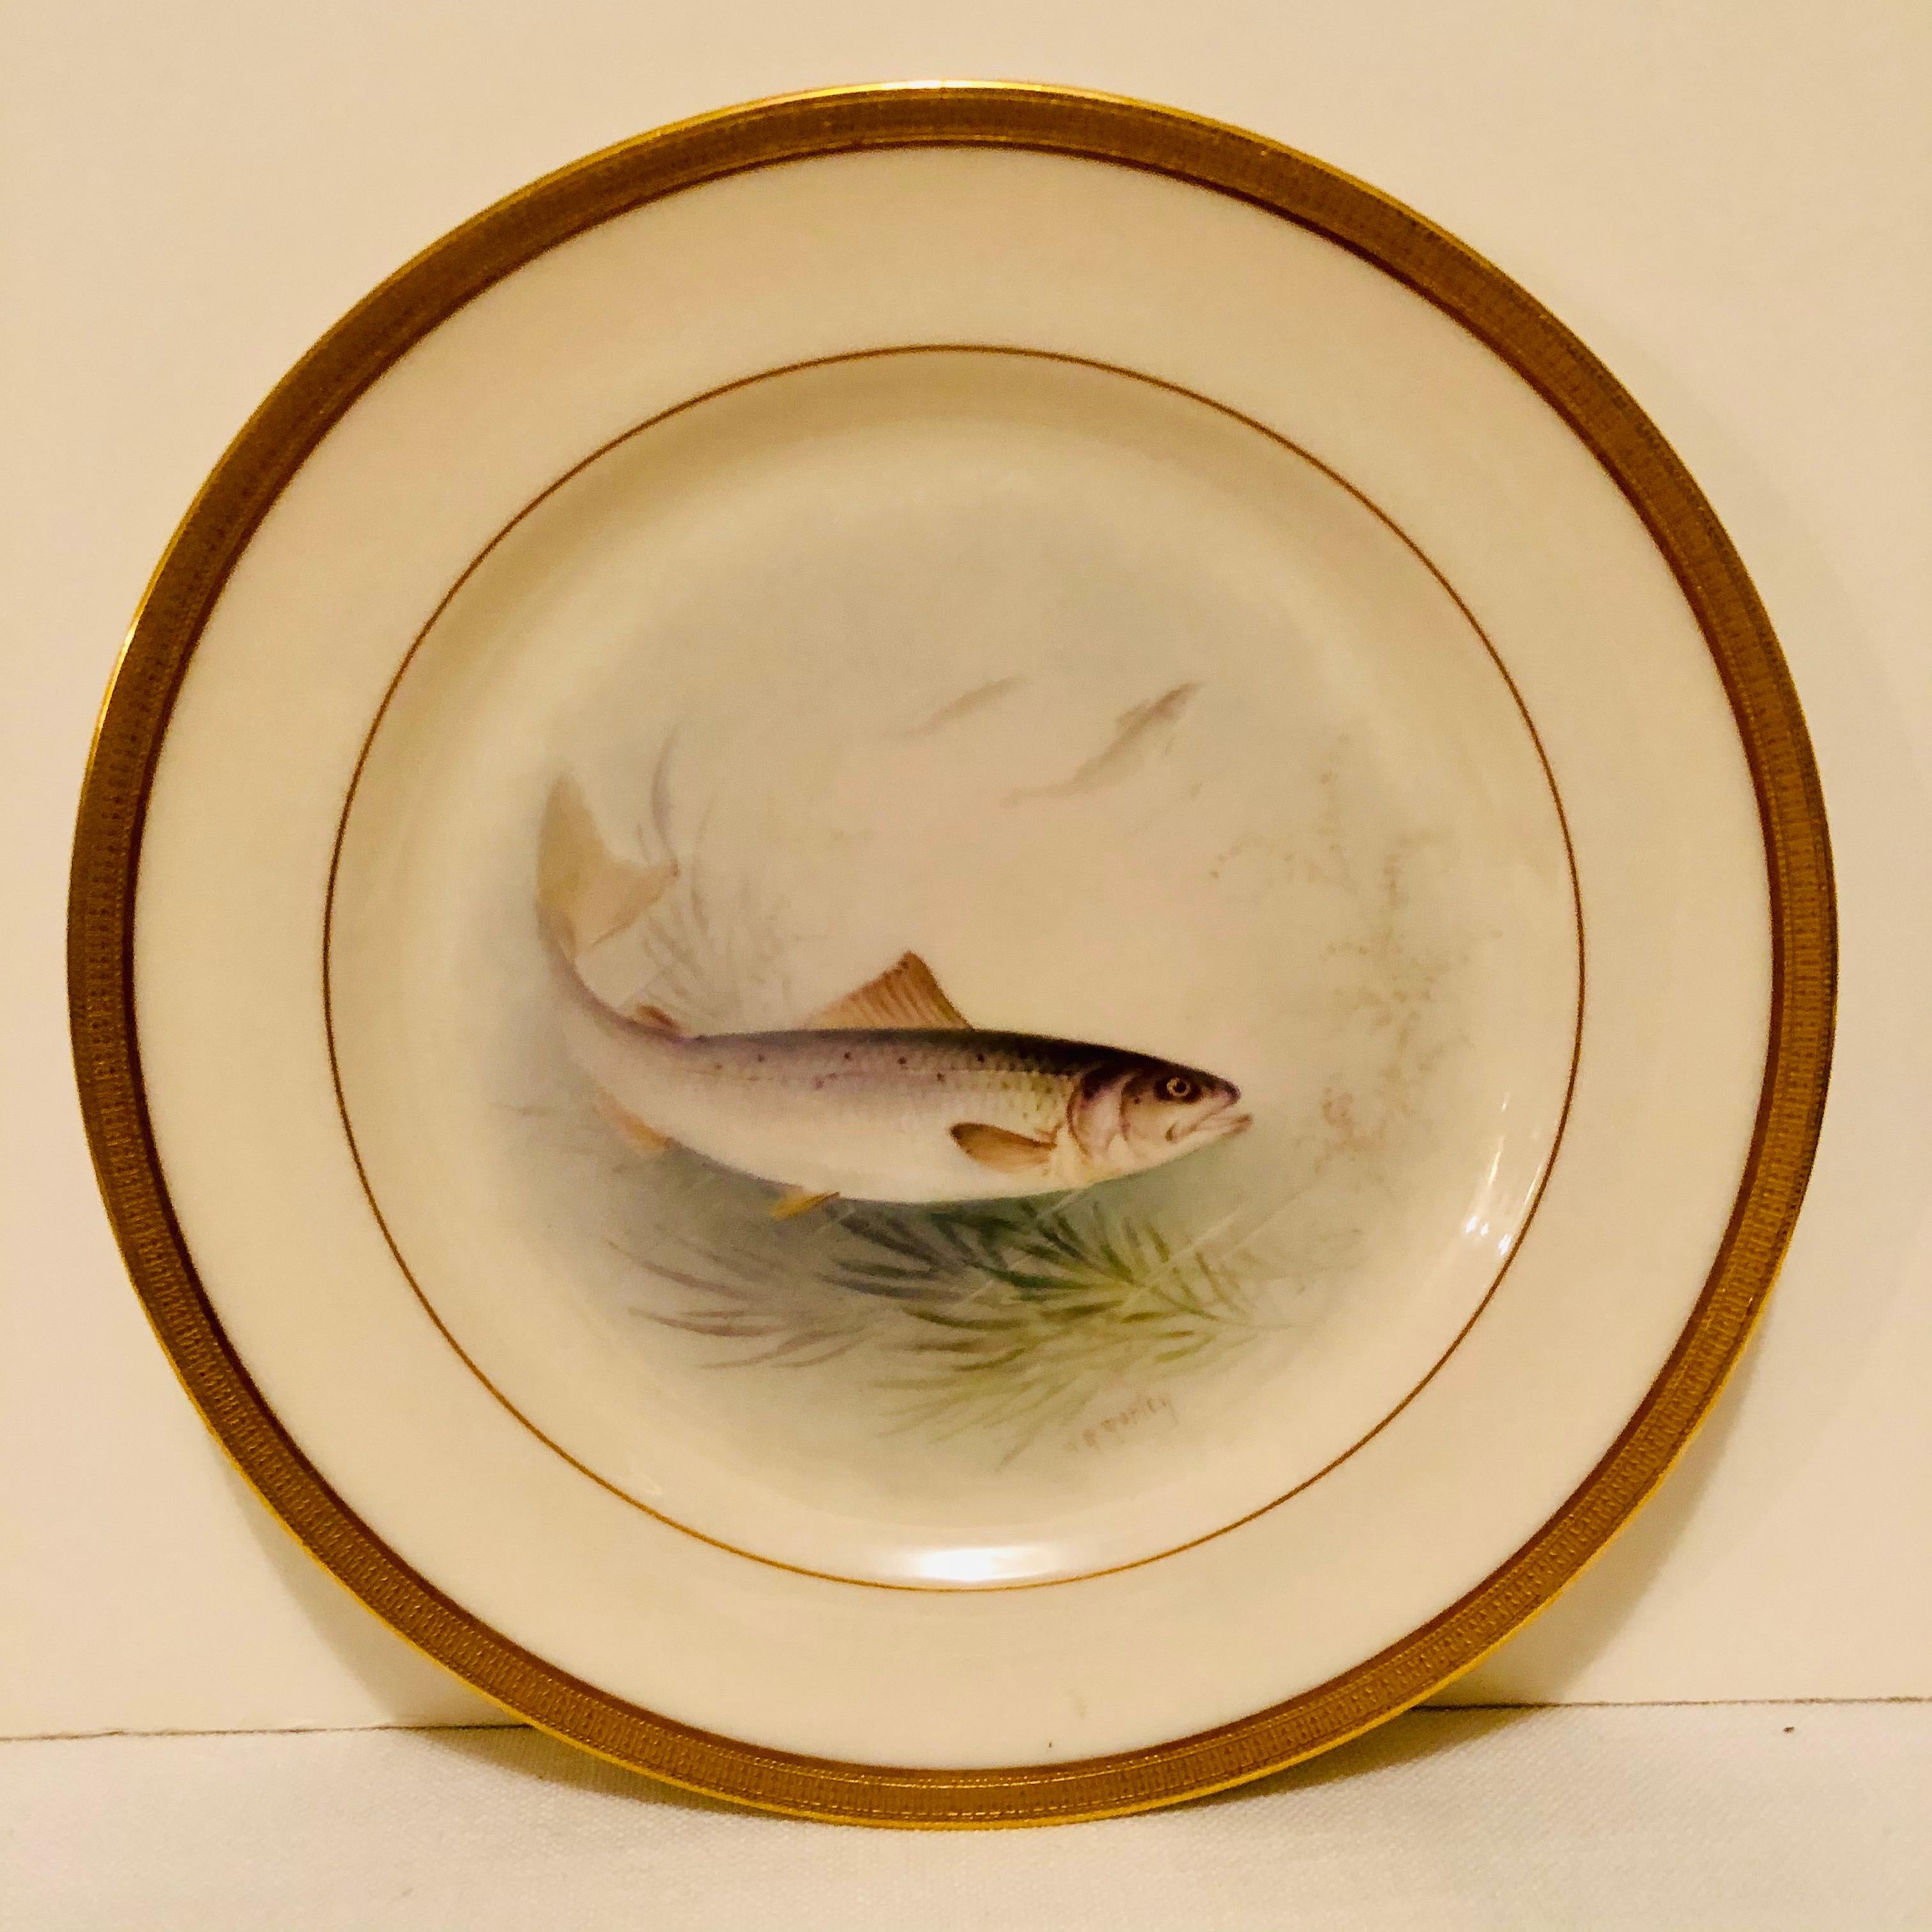 Other Set of Lenox Fish Plates Each Painted with Different Fish Artist Signed Morley